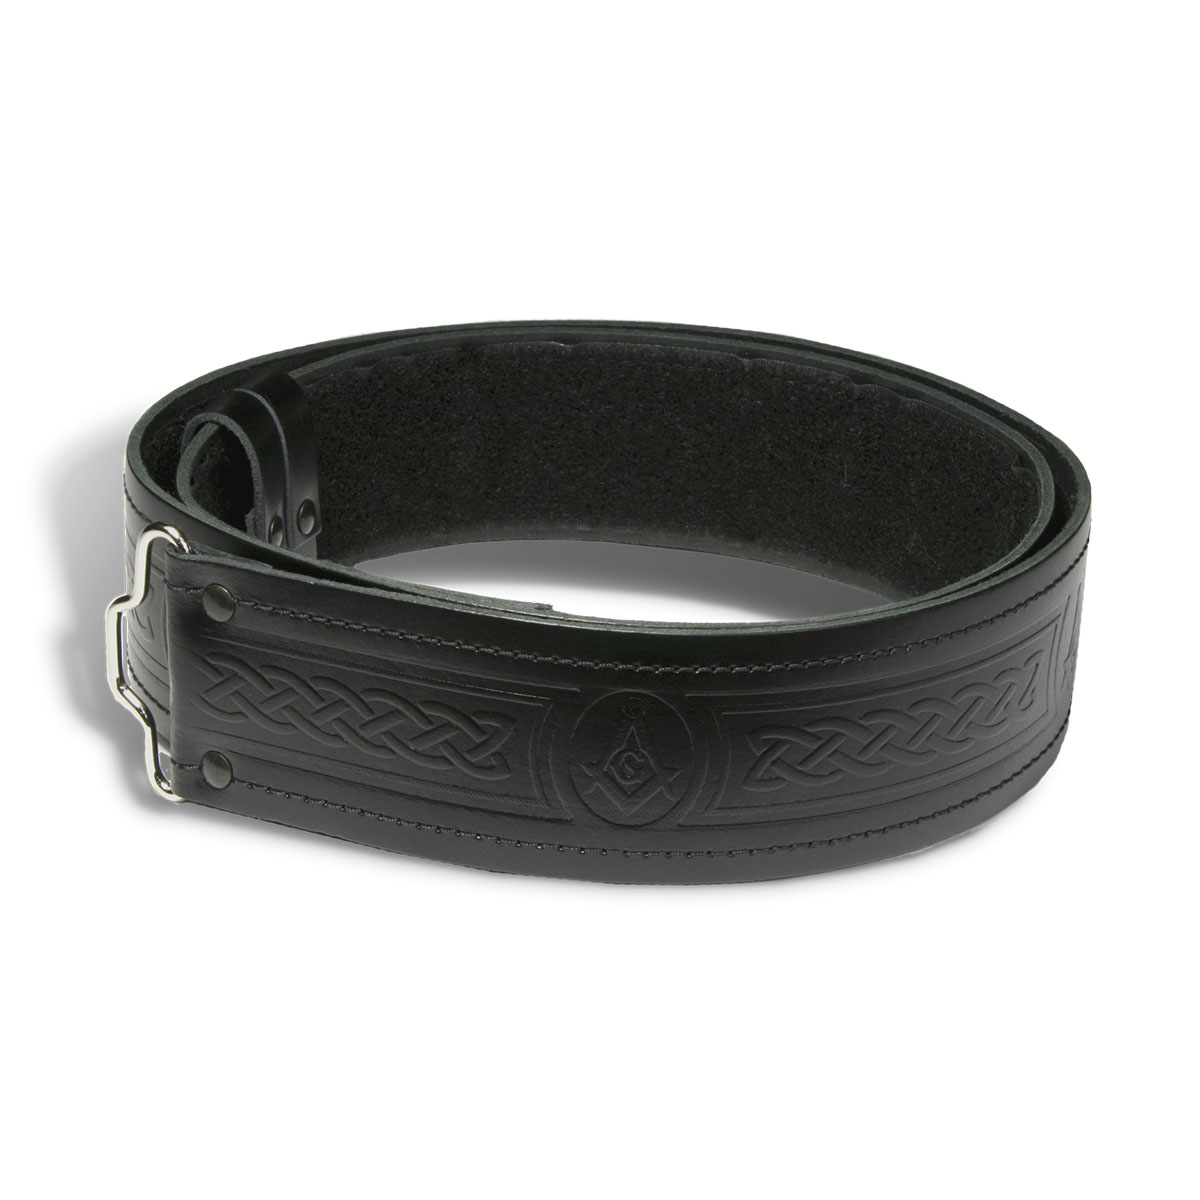 A Masonic Embossed Quality kilt belt with an ornate buckle.